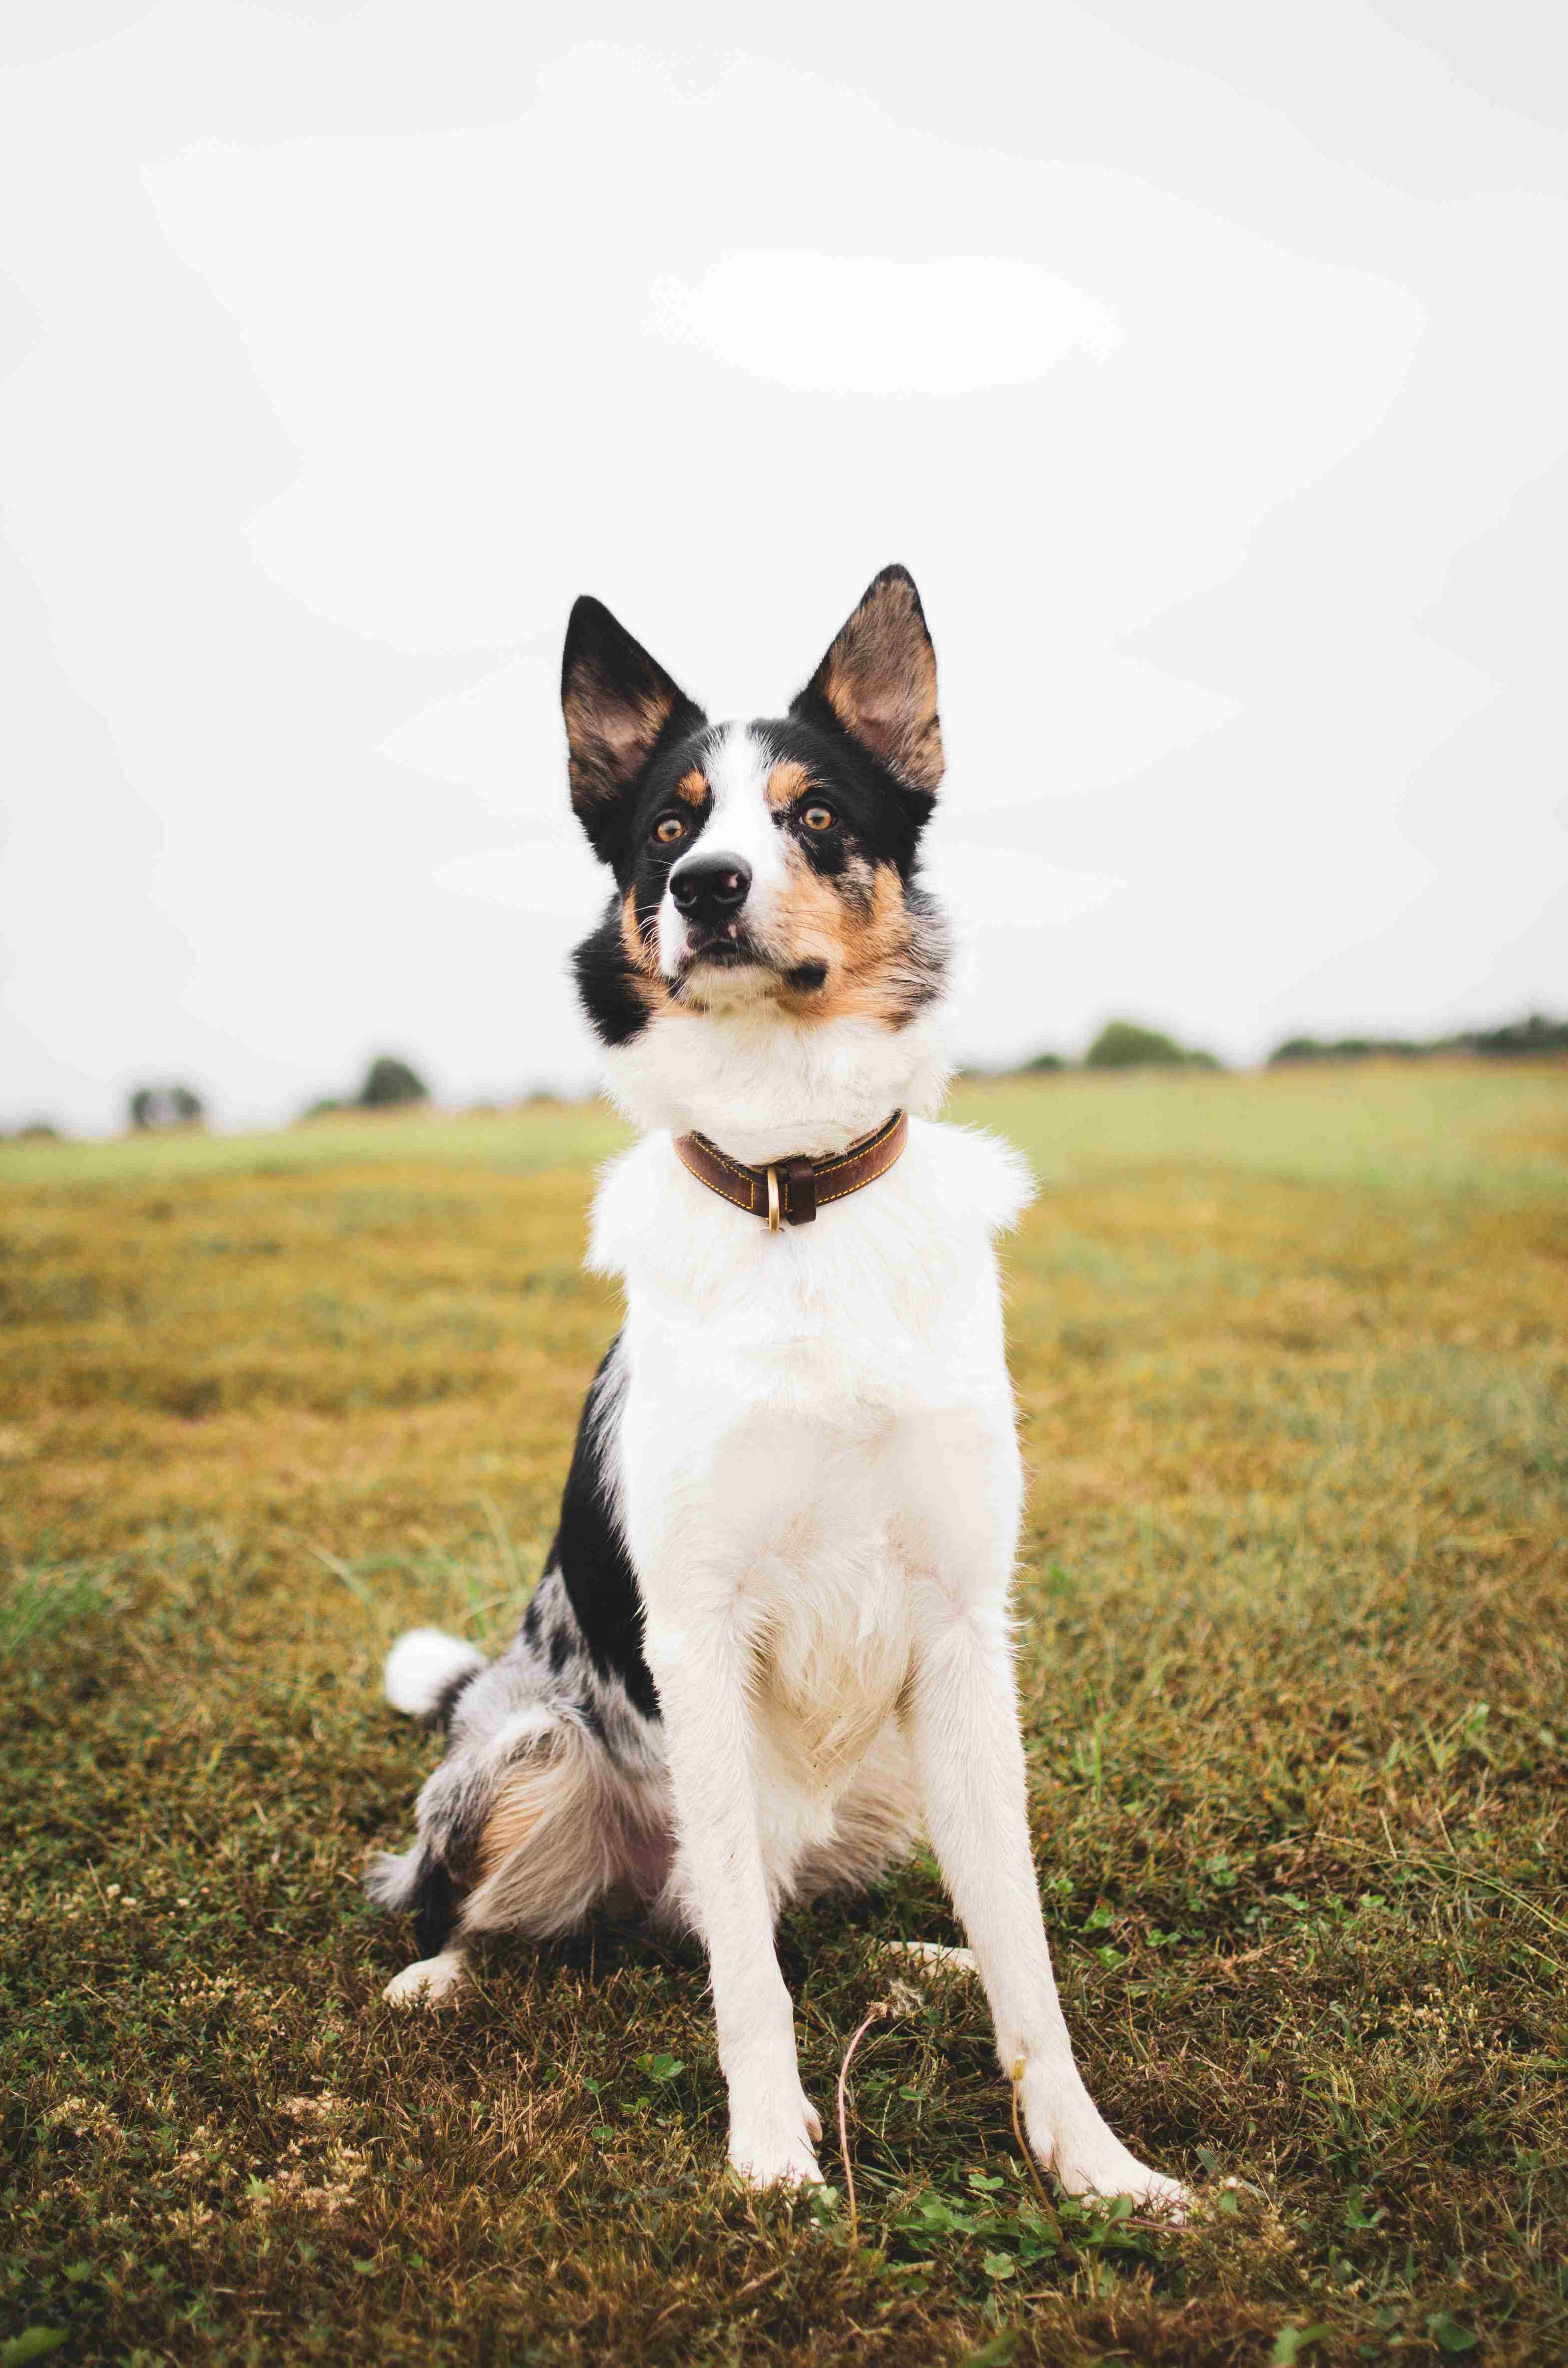 Are Border Collies Prone to Heart Problems? Understanding the Risks and Symptoms